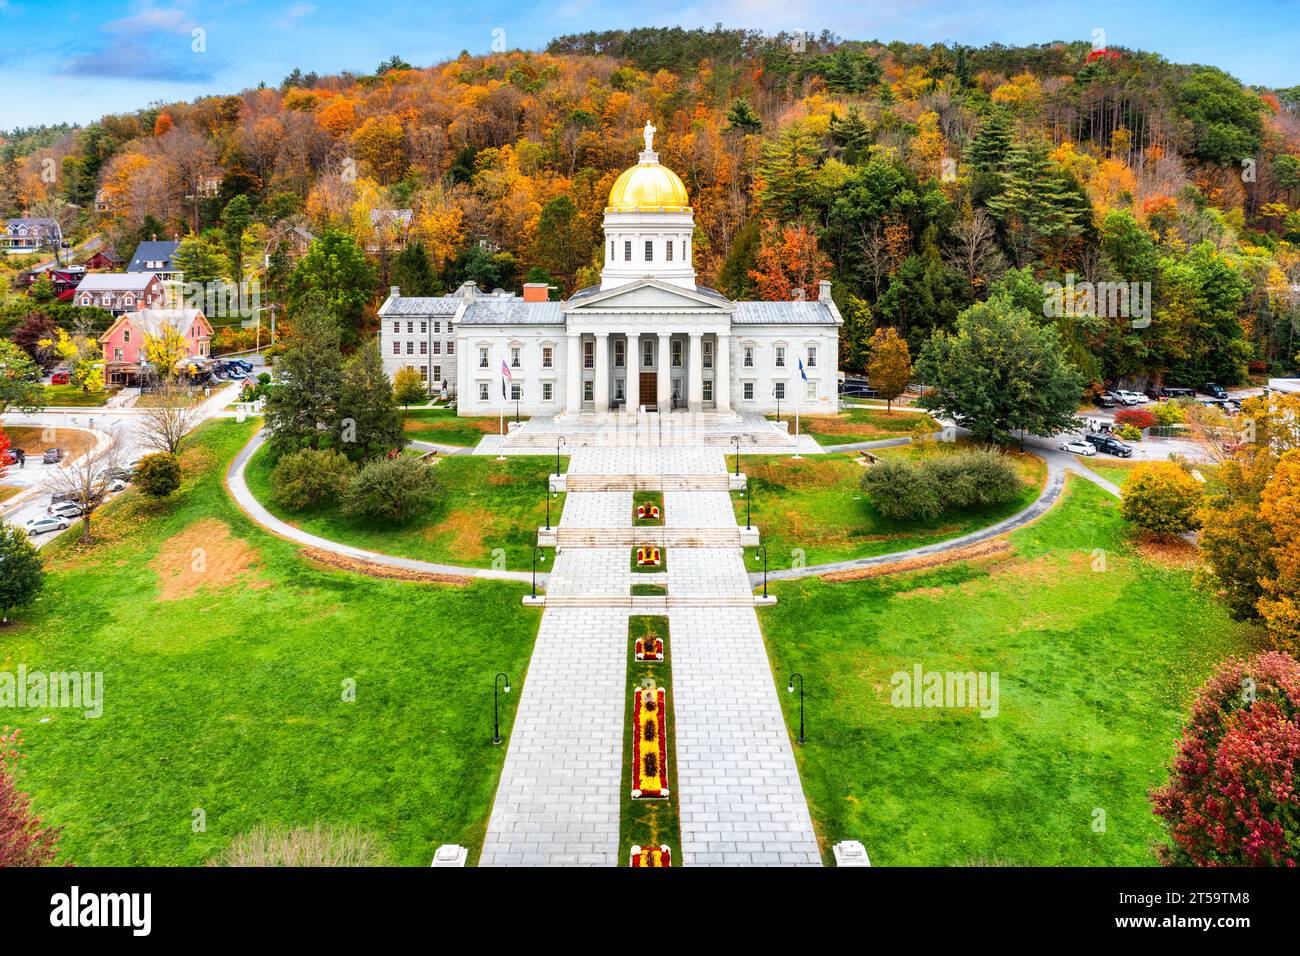 Vermont State House, in Montpelier, VT Stockfoto